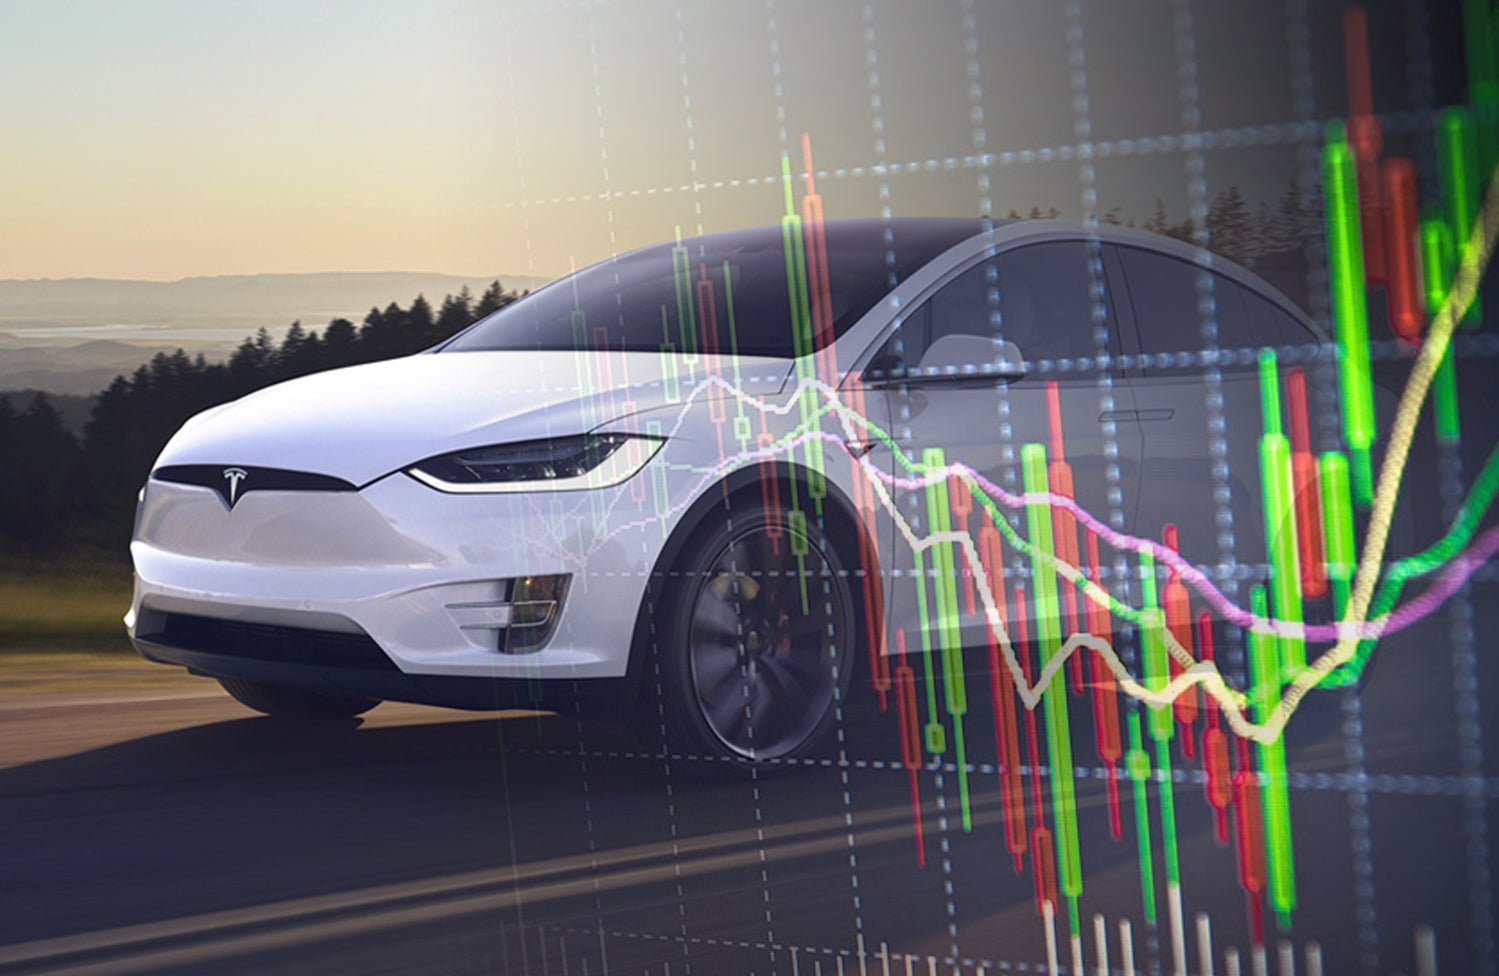 Tesla stock just closed at a record high and Tesla's market cap exceeds $70 billion: Analysis